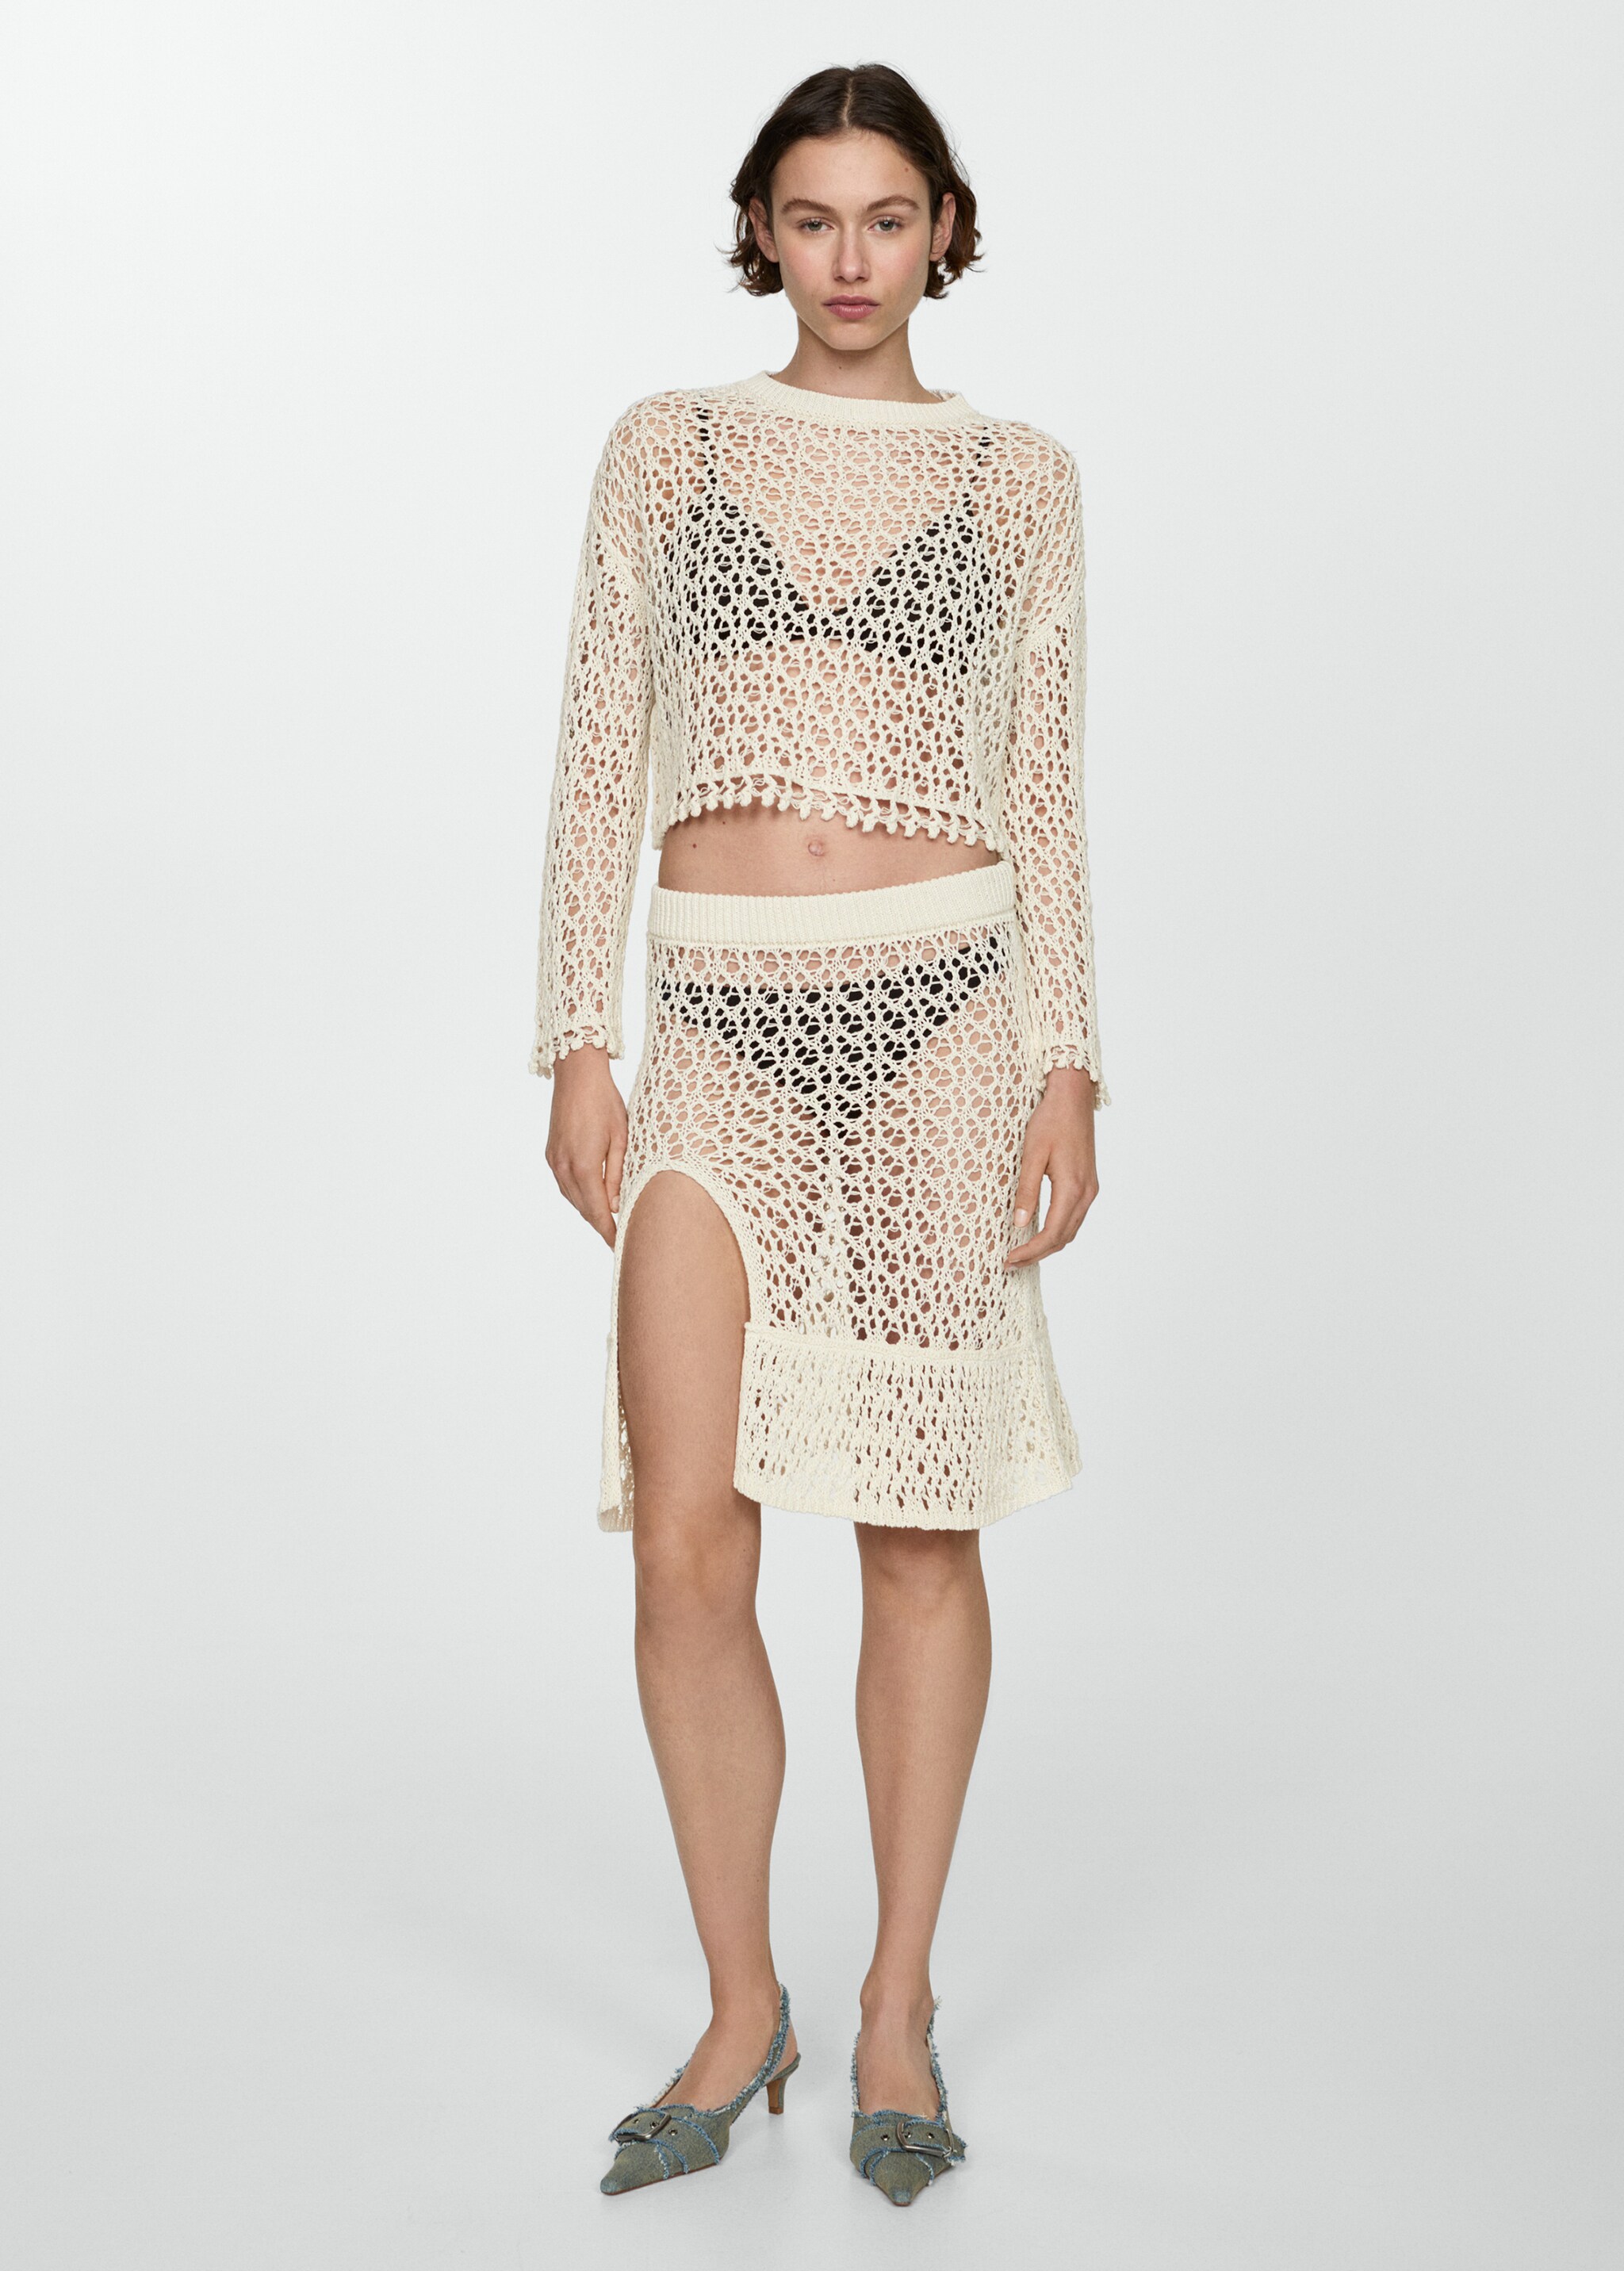 Crochet skirt with opening - General plane